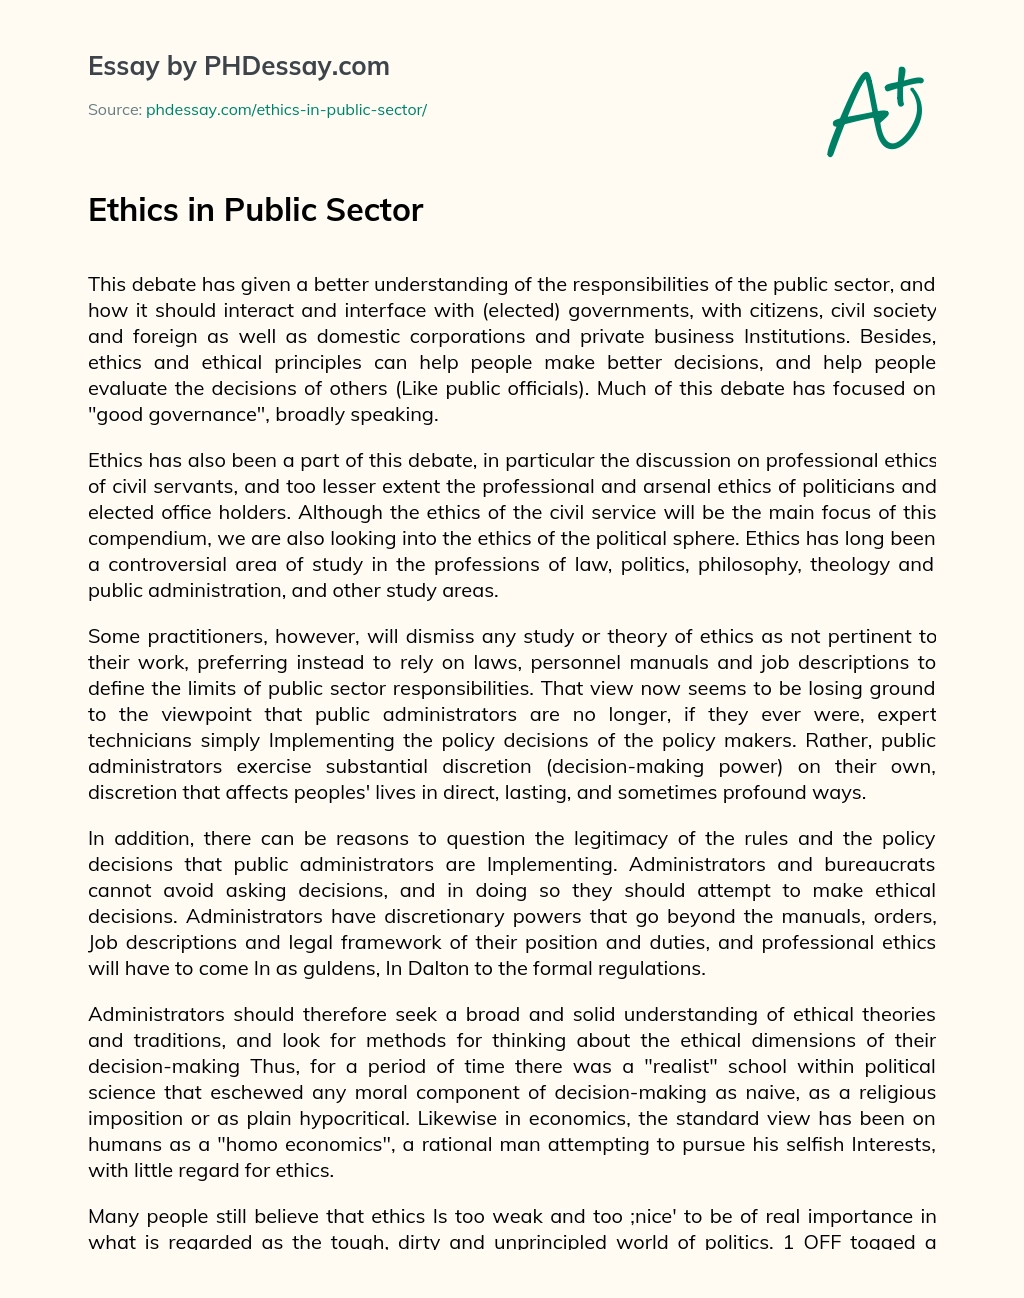 Ethics in Public Sector essay